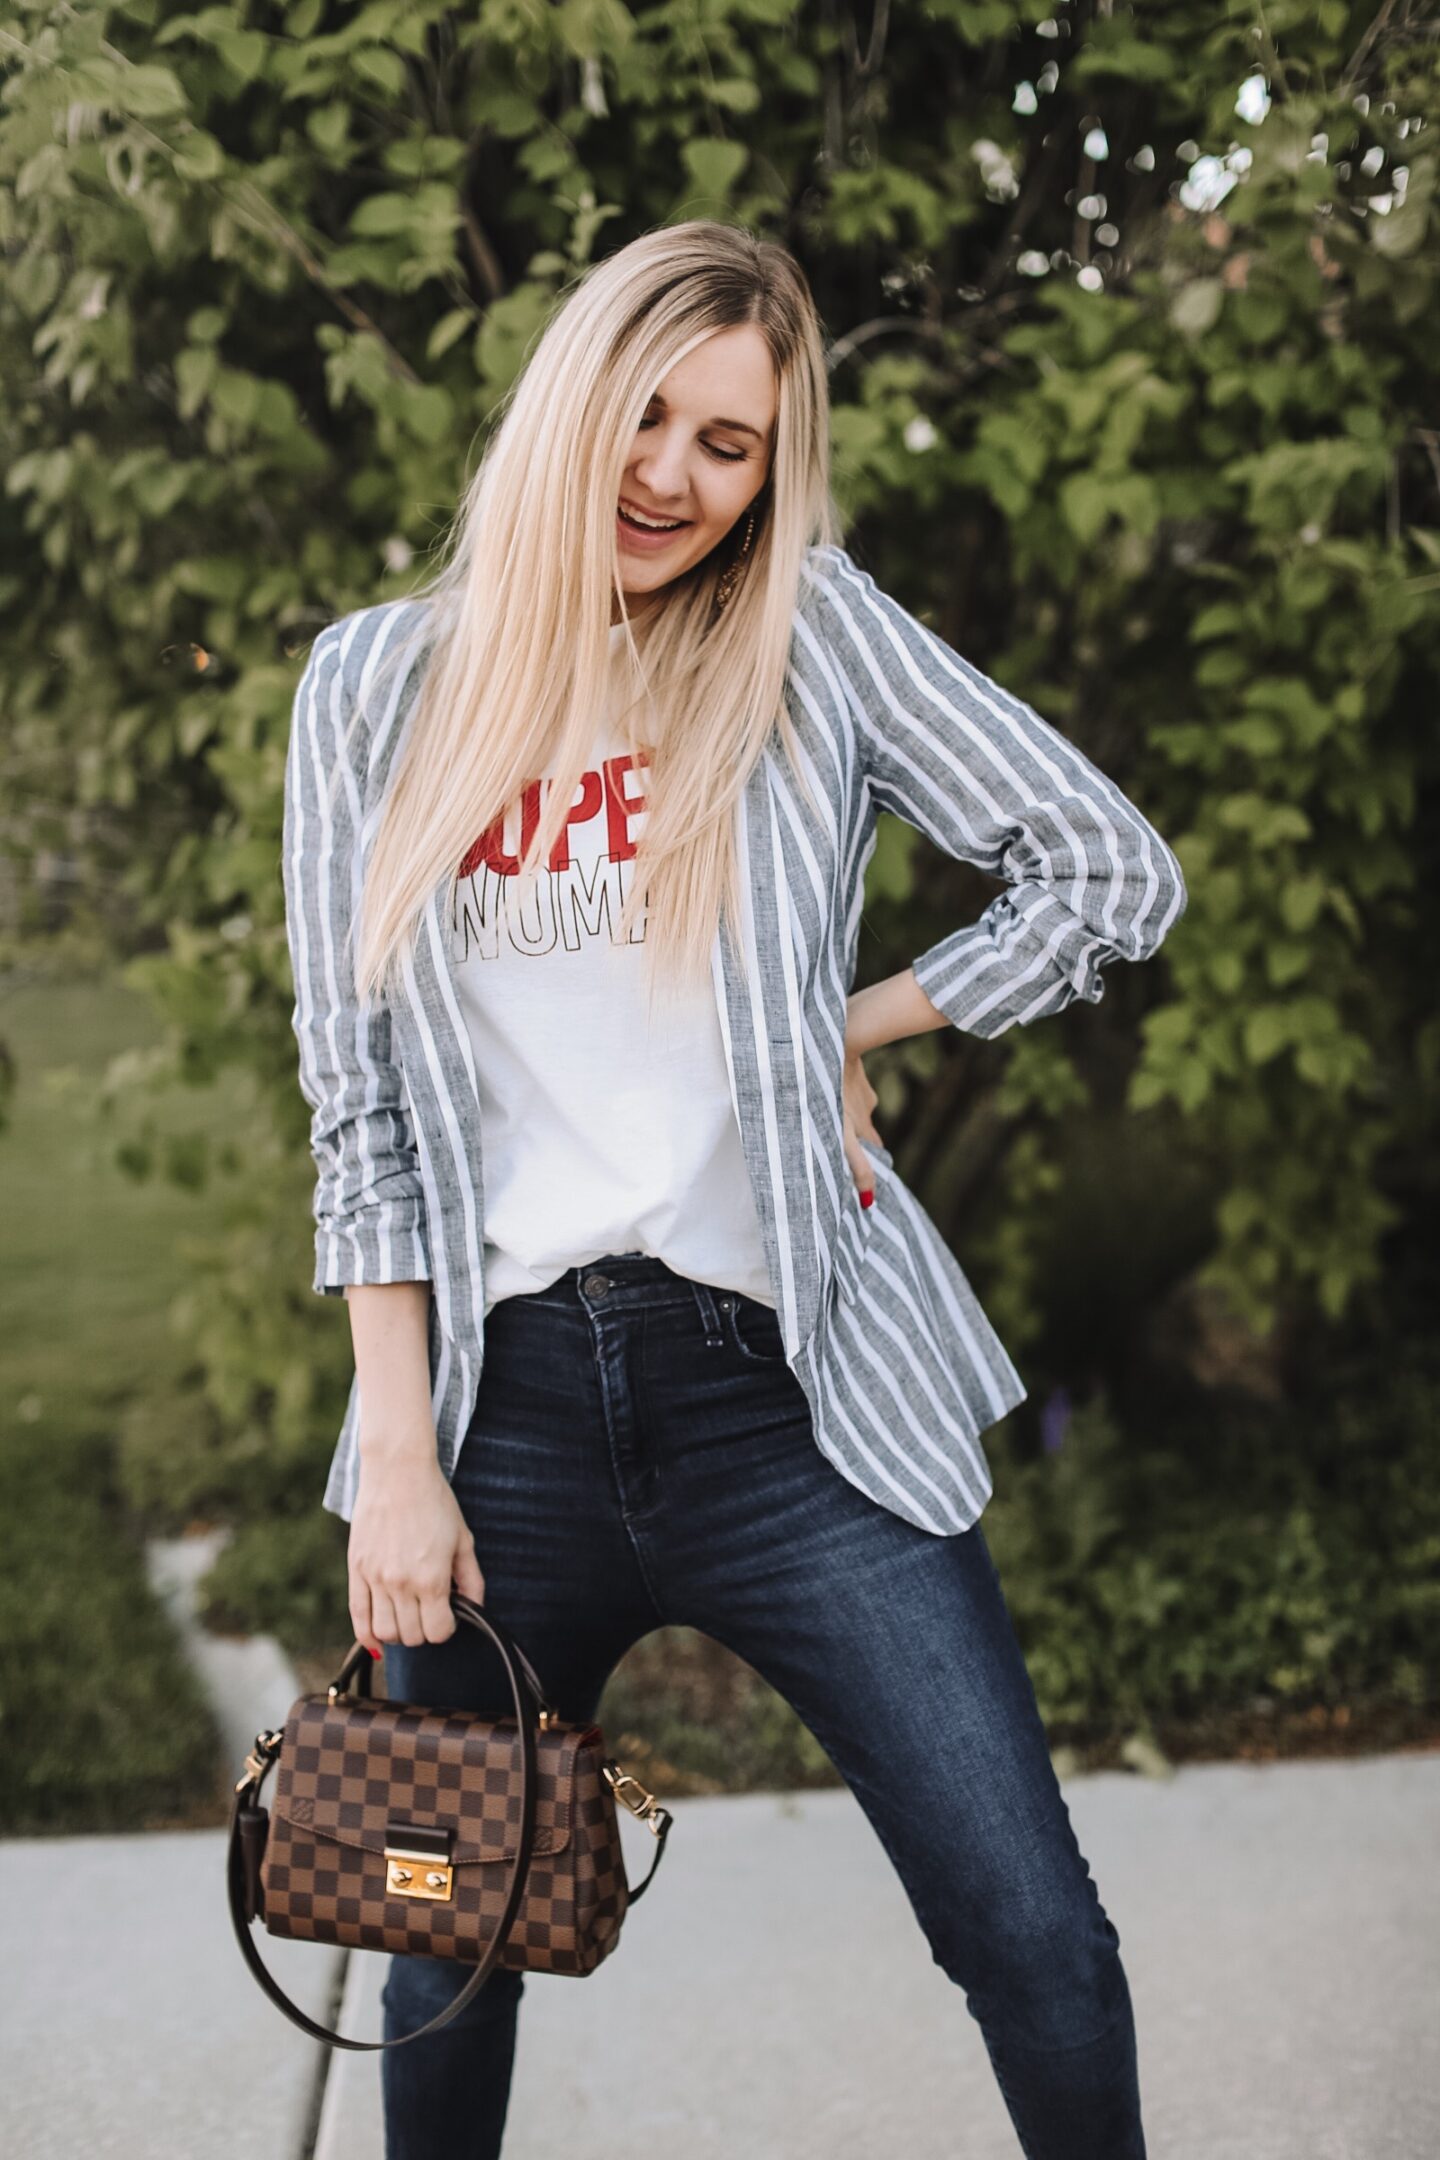 4th of July outfit inspiration (part 3)